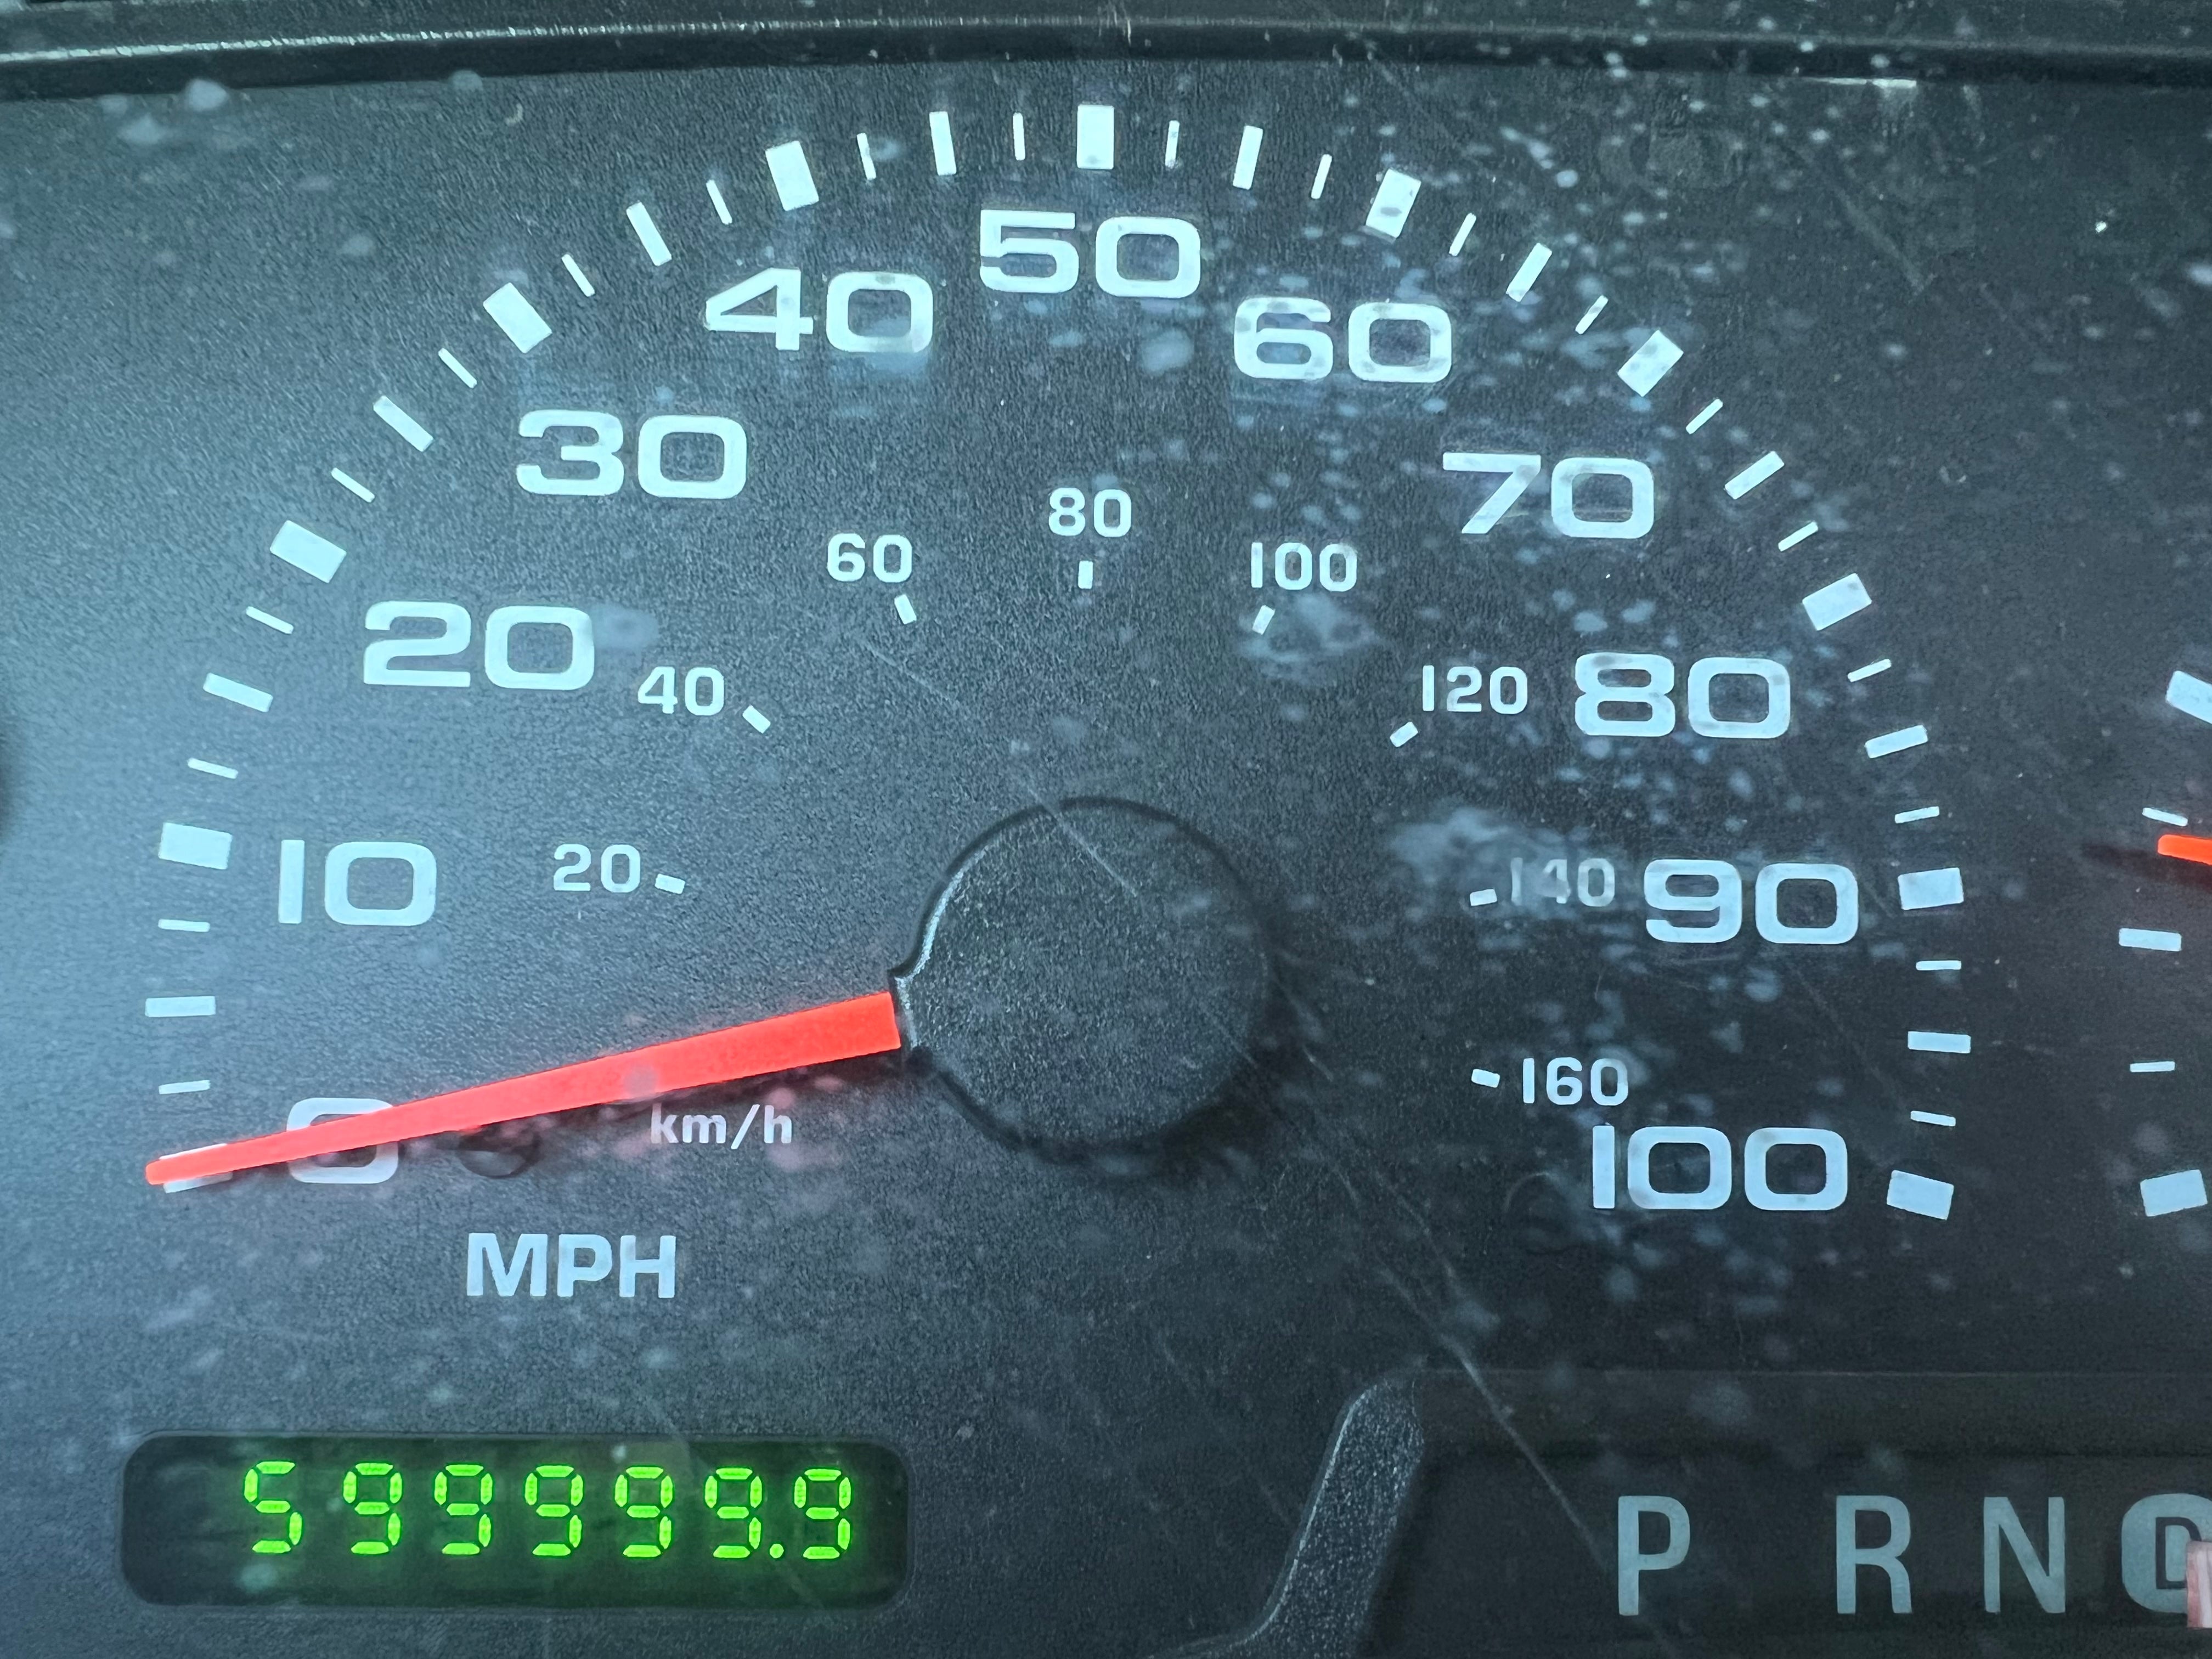 Just about ready to hit 600K miles with Slick 50!